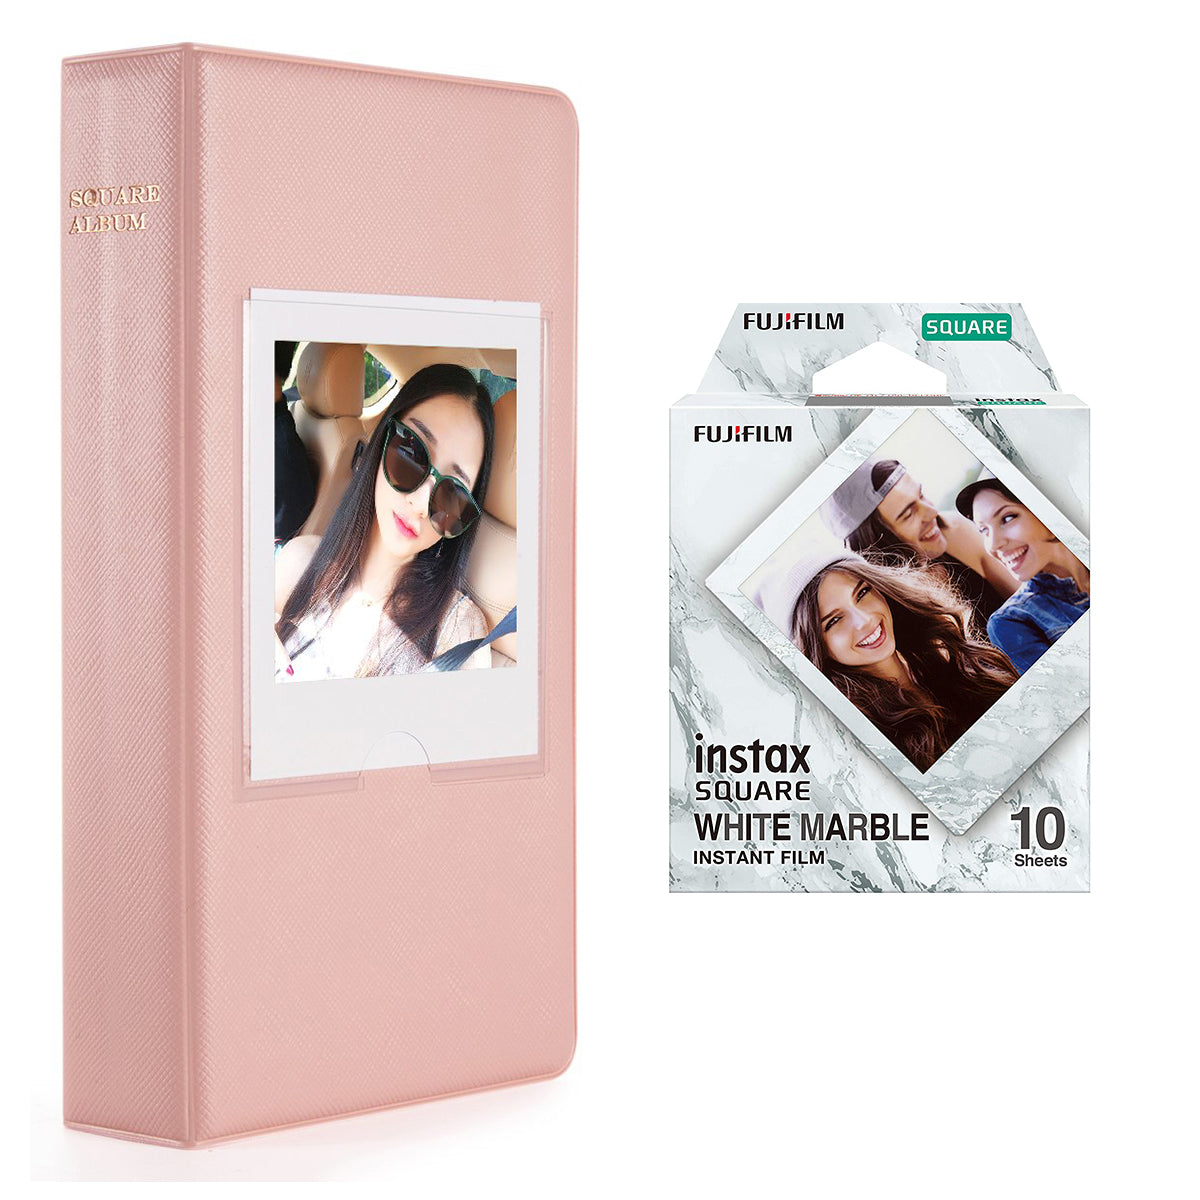 Fujifilm Instax square 10X1 white marble Instant Film With 64 sheet Album for square film (pink)